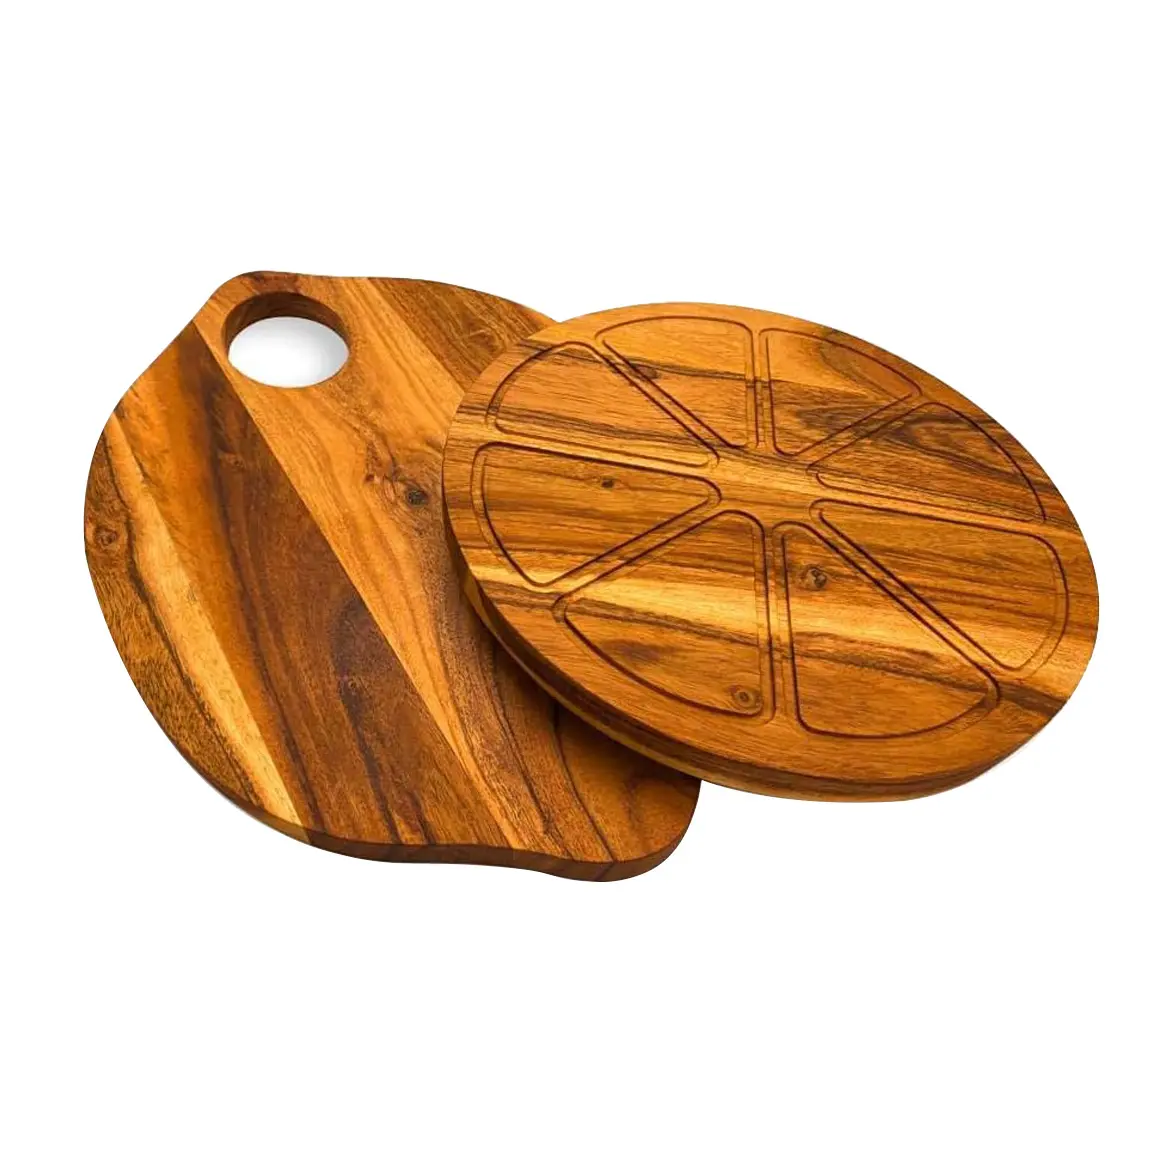 Custom Design Acacia Wood Serving Platter Set of 2 Organic Wooden Cutting & Serving Board Meat Fruits Cheese Charcuterie Boards